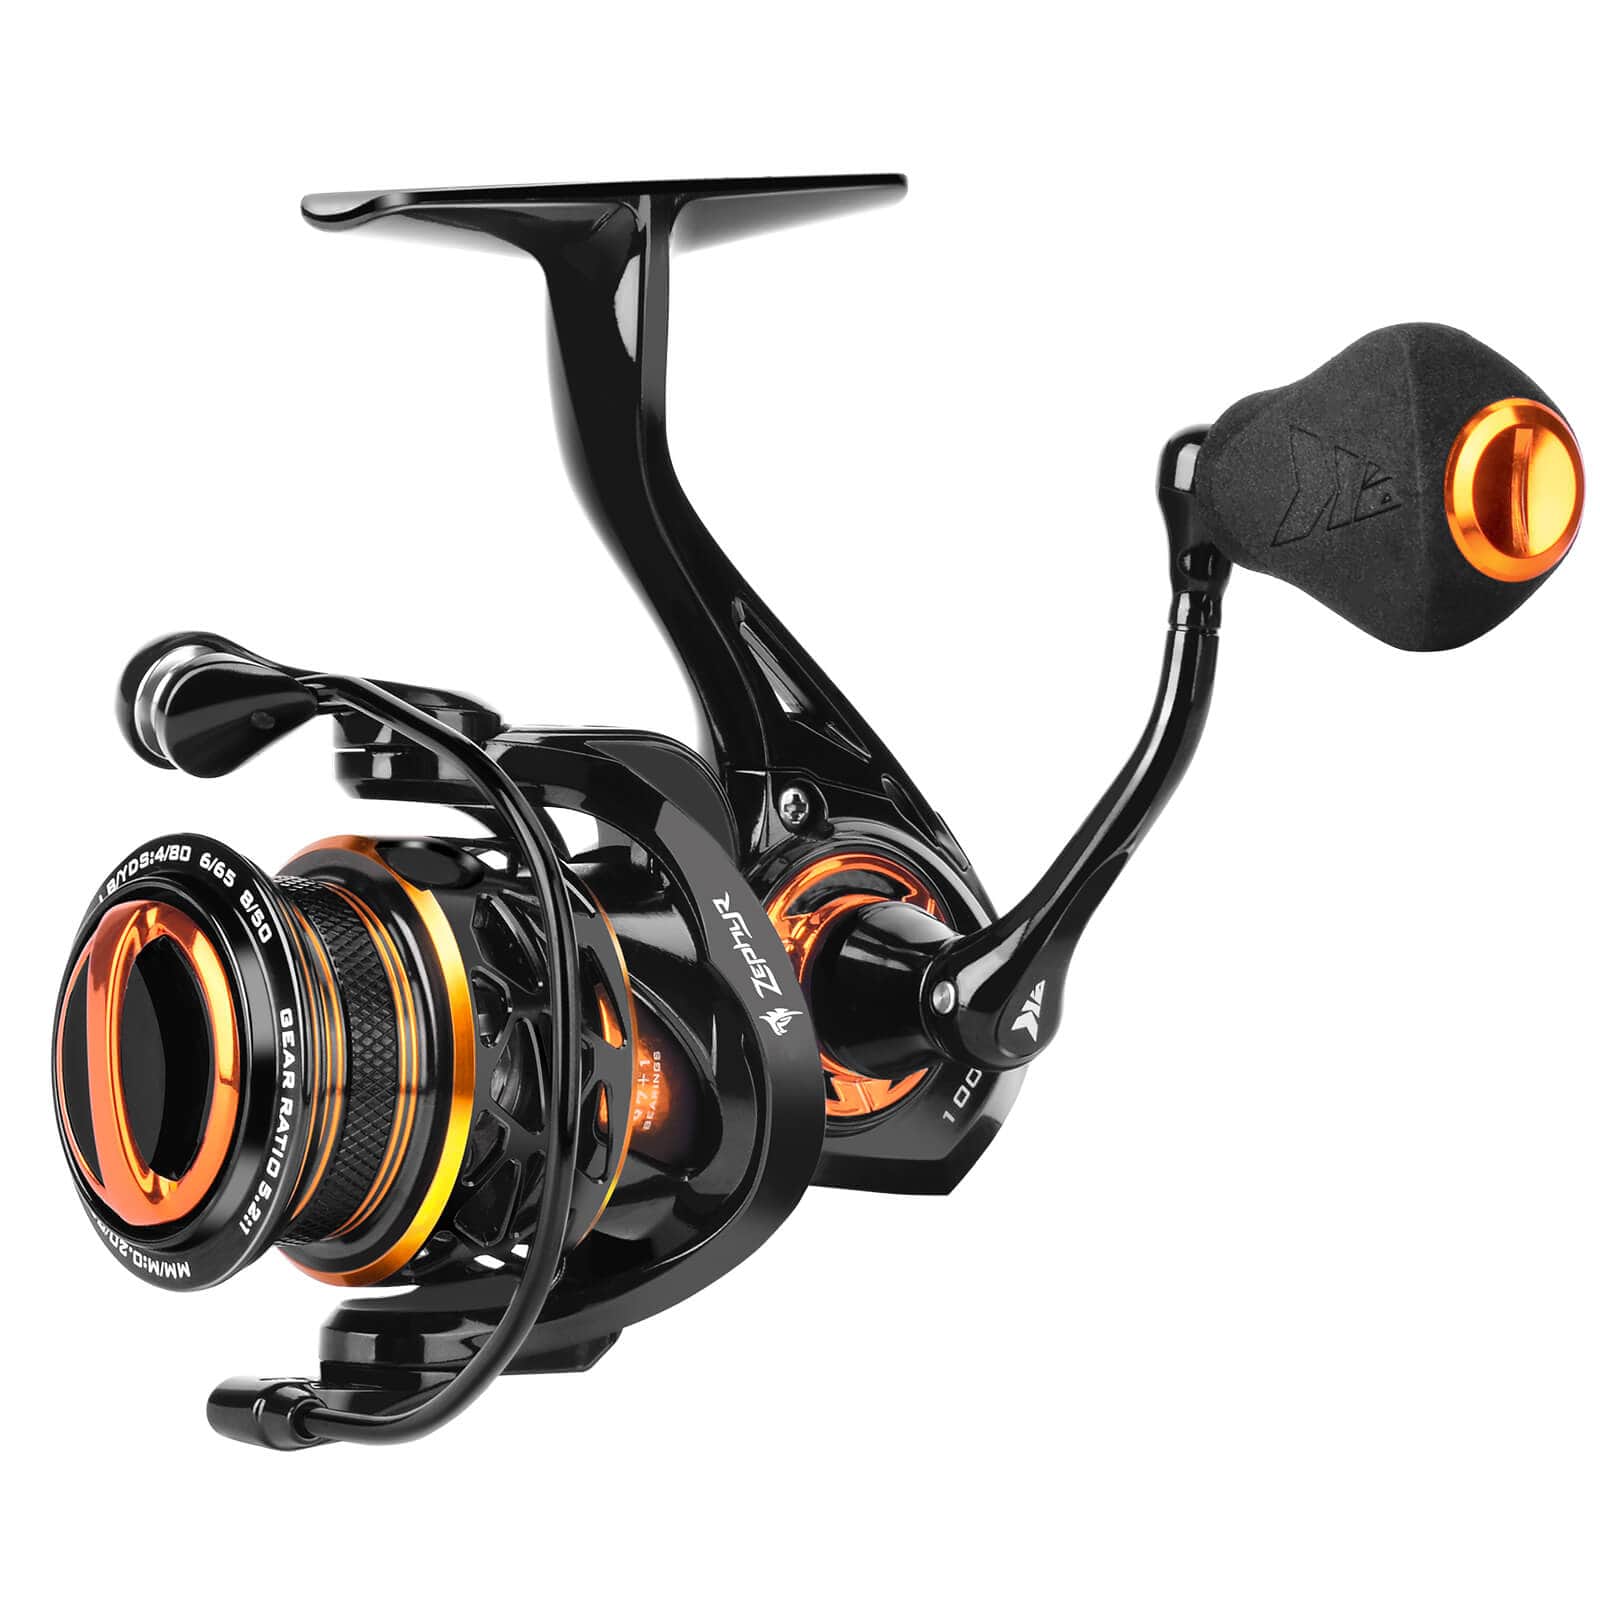 KastKing Zephyr Spinning Reel,Size 1000 Fishing Reel, Light Weight Ultra  Smooth Powerful Spinning Fishing Reels - Price History